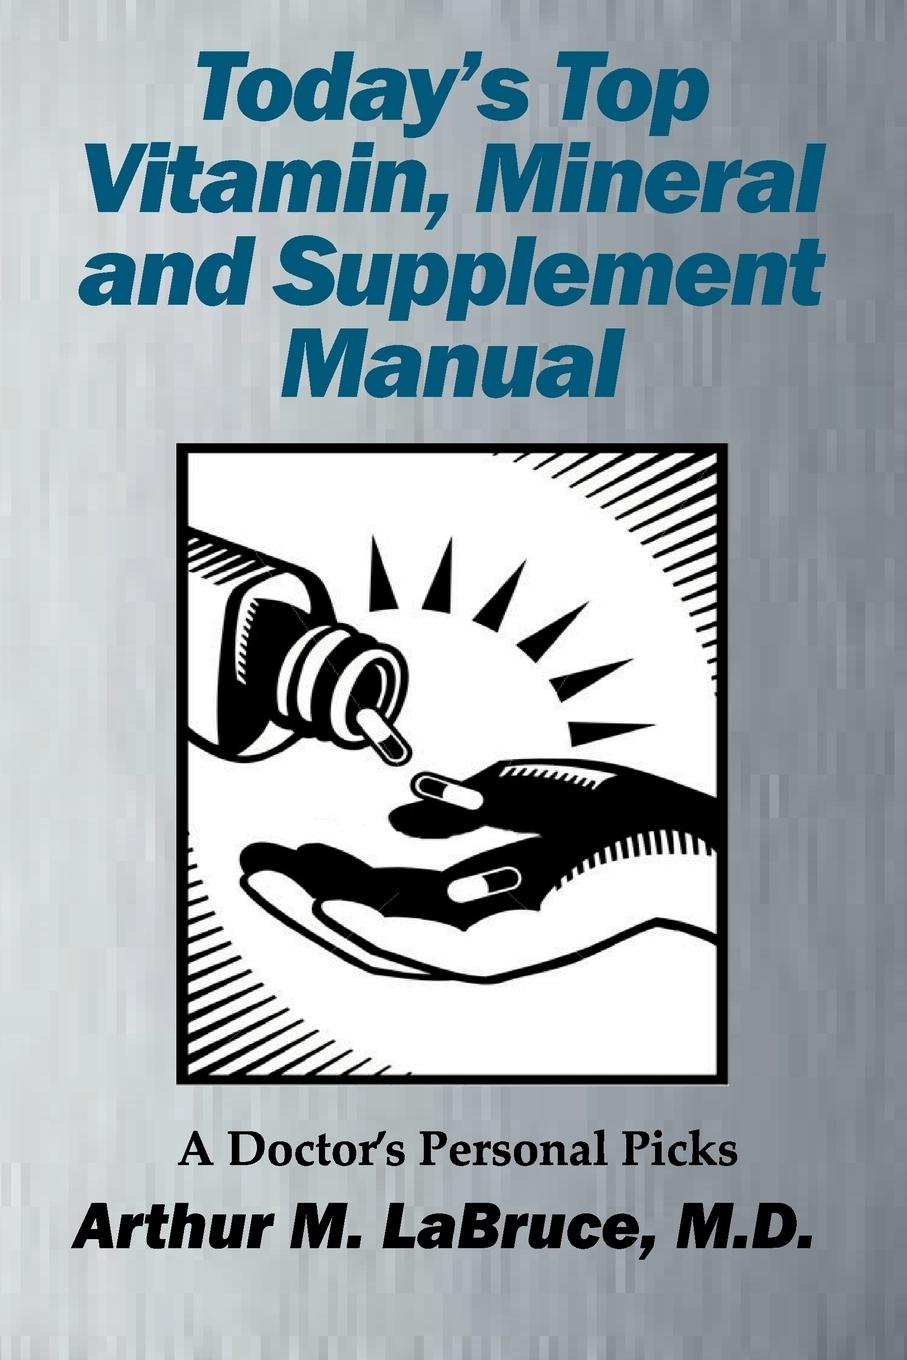 Today's Top Vitamin, Mineral and Supplement Manual / A Doctor's Personal Picks / Arthur Labruce / Taschenbuch / Paperback / Englisch / 2011 / Lulu.com / EAN 9781257058440 - Labruce, Arthur